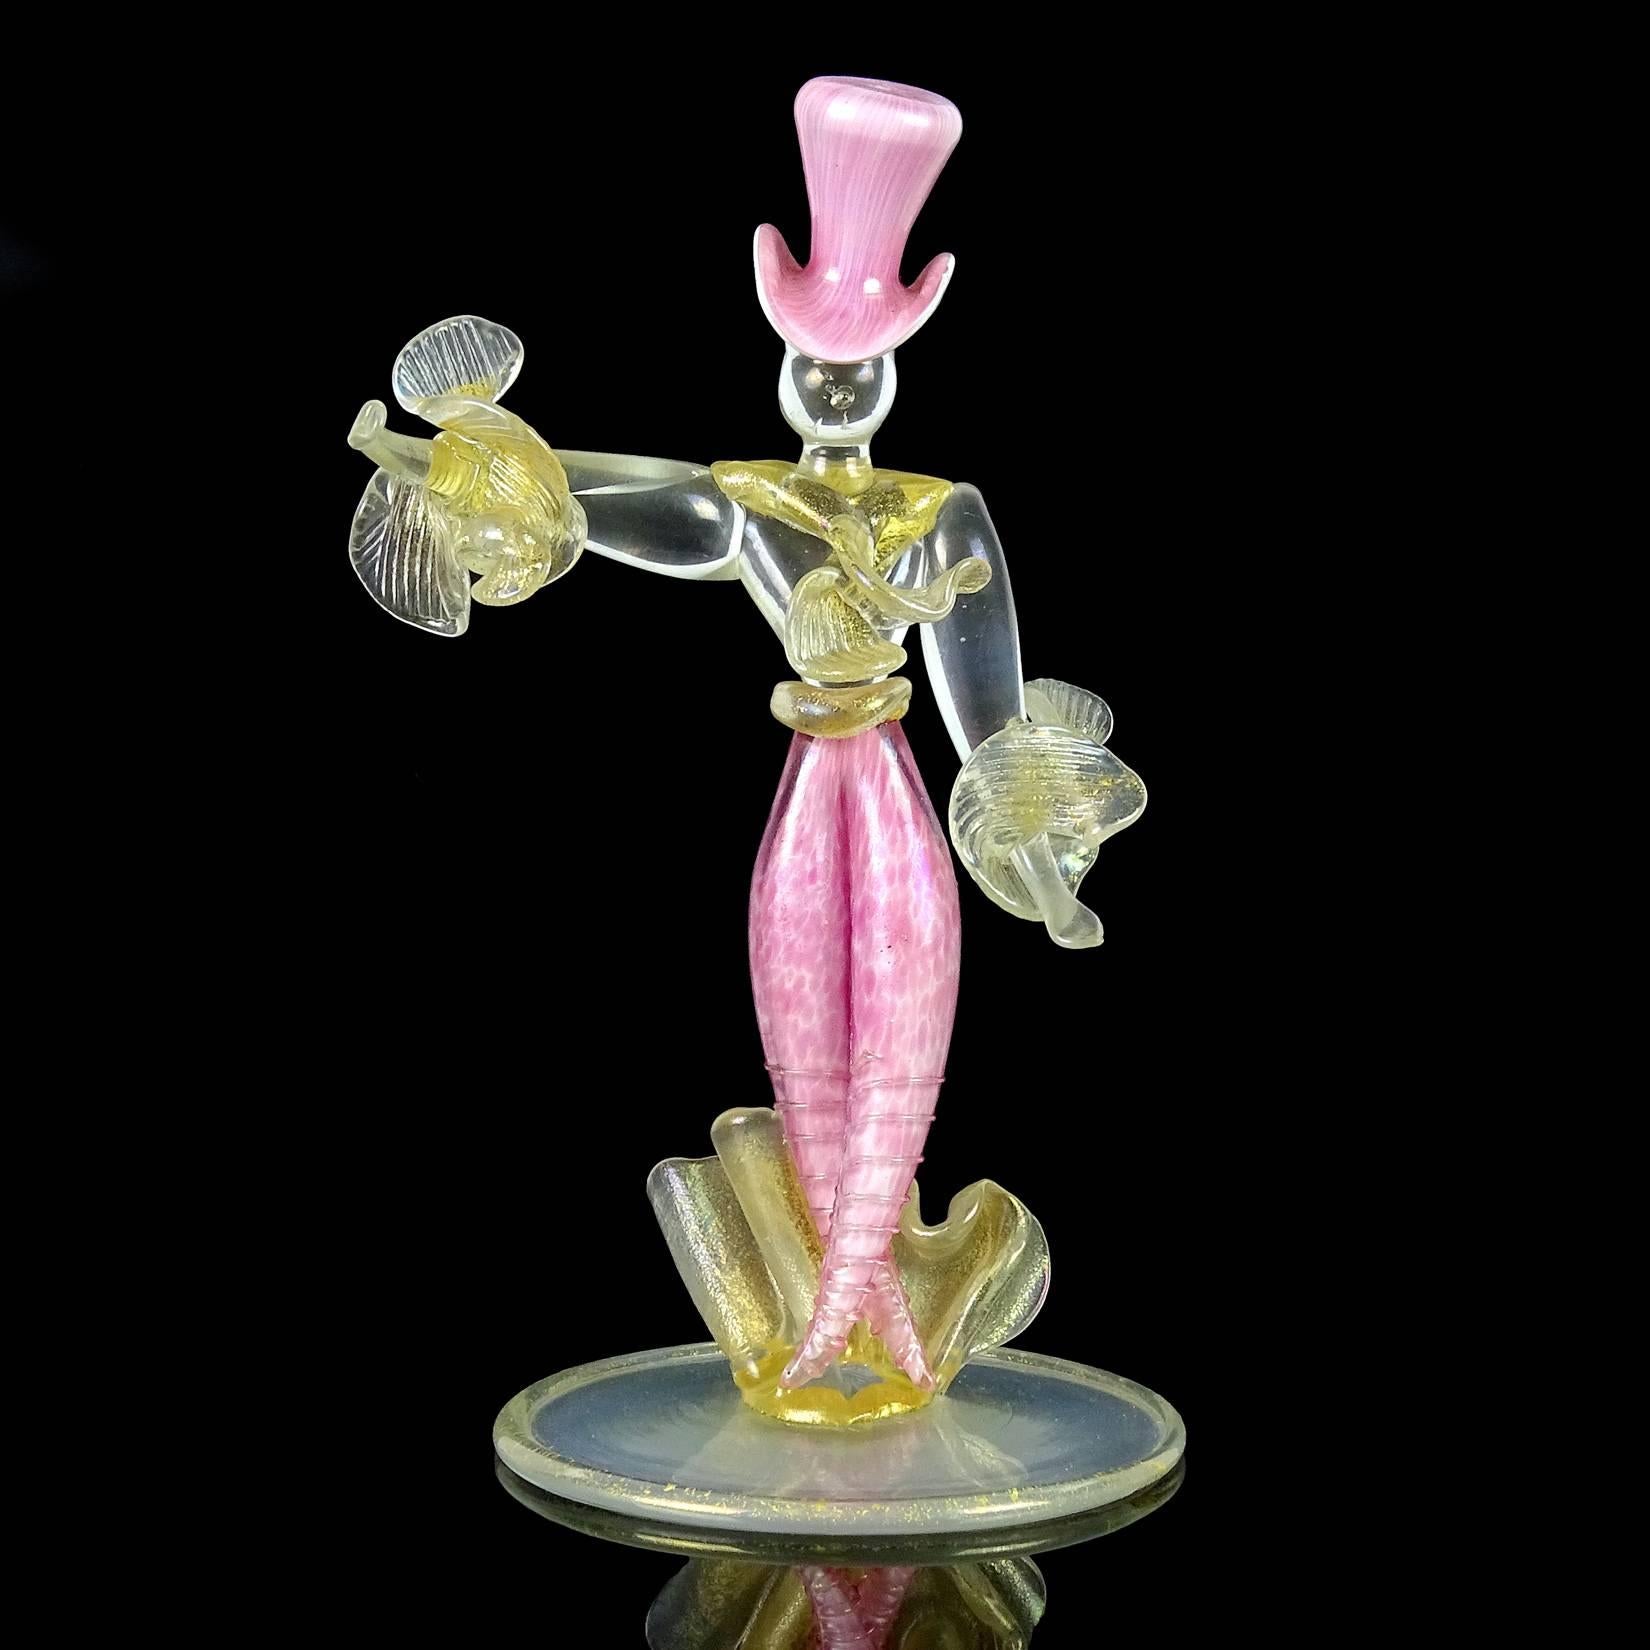 Rare Murano hand blown iridescent pink Italian art glass man in top hat figurine / sculpture. Documented to designer Flavio Poli for Seguso Vetri d'Arte, circa 1930s. It has a gold leaf accents with high iridescence throughout. Measures 7 3/4